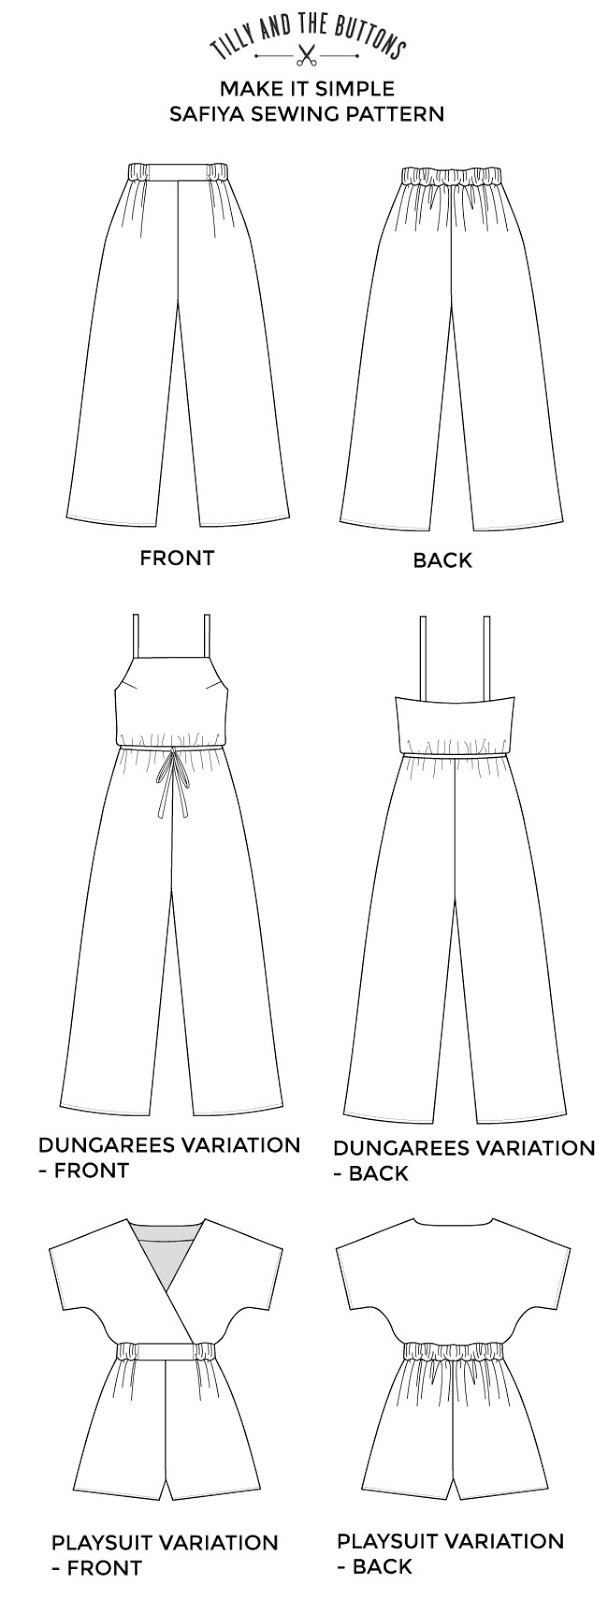 Safiya trousers, dungarees + playsuit sewing pattern - Make It Simple book - Tilly and the Buttons